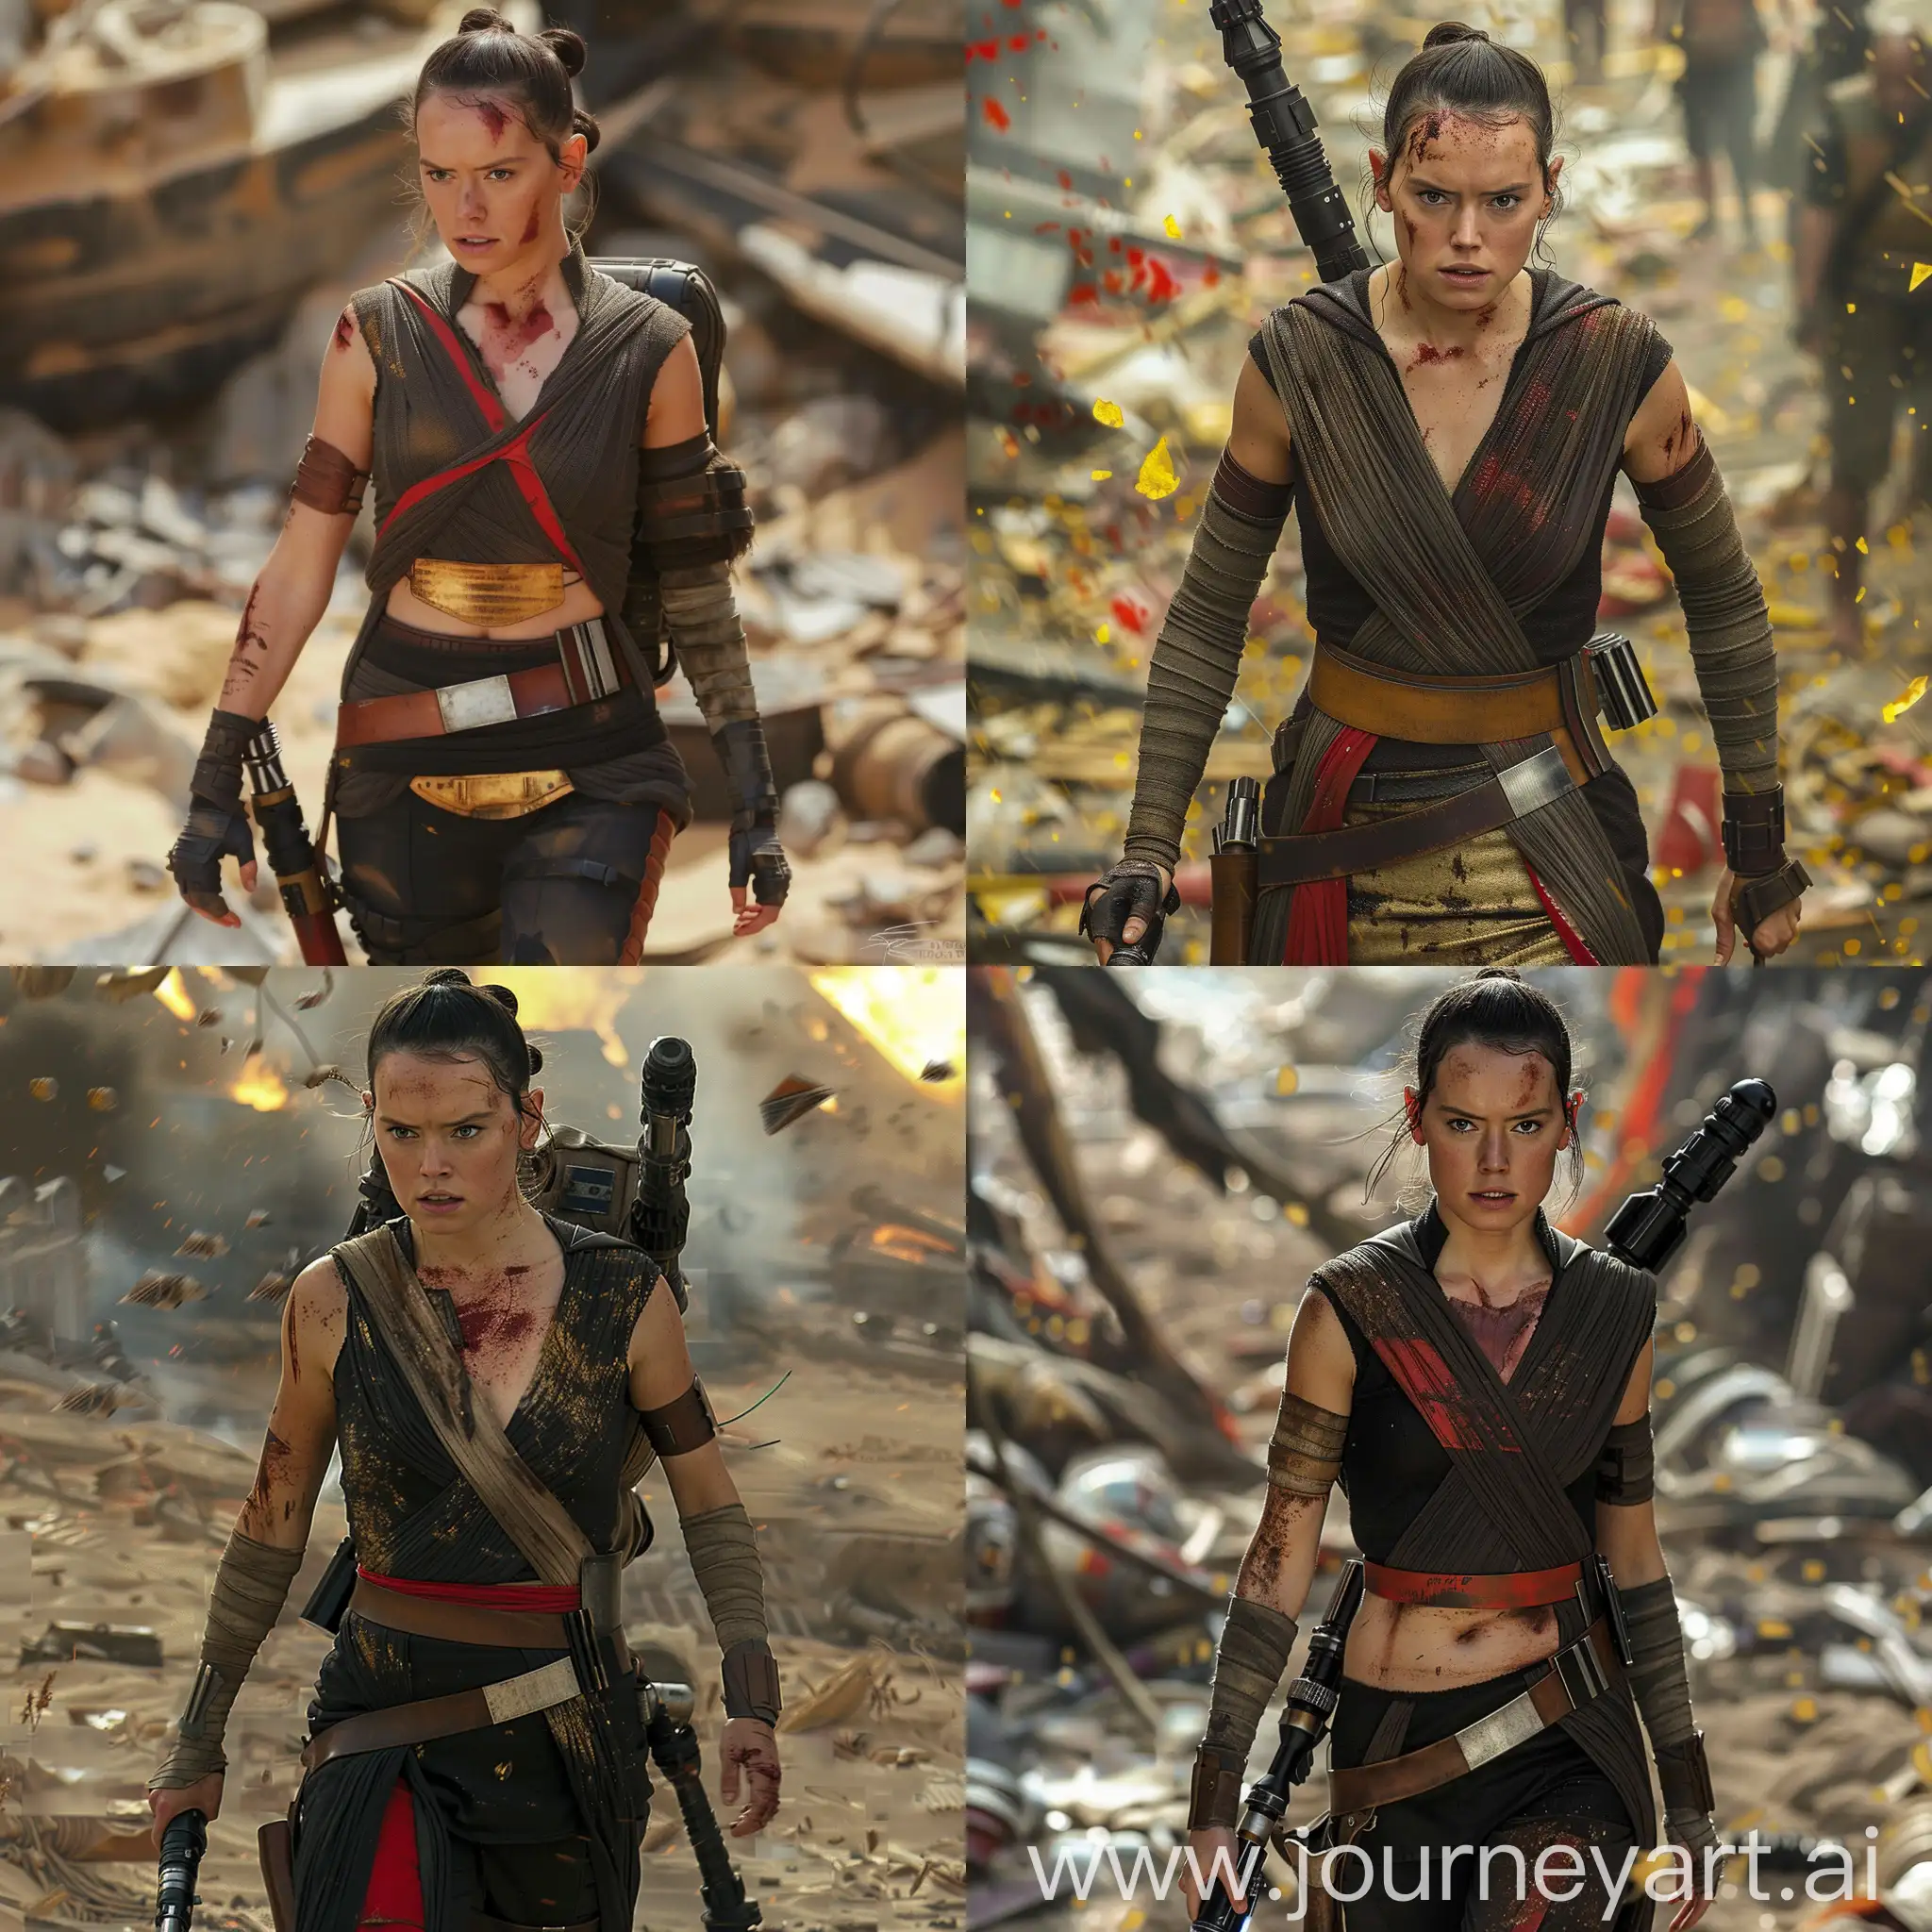 Rey-Skywalker-in-Modern-Black-Red-and-Gold-Jedi-Master-Costume-Walking-in-Space-Environment